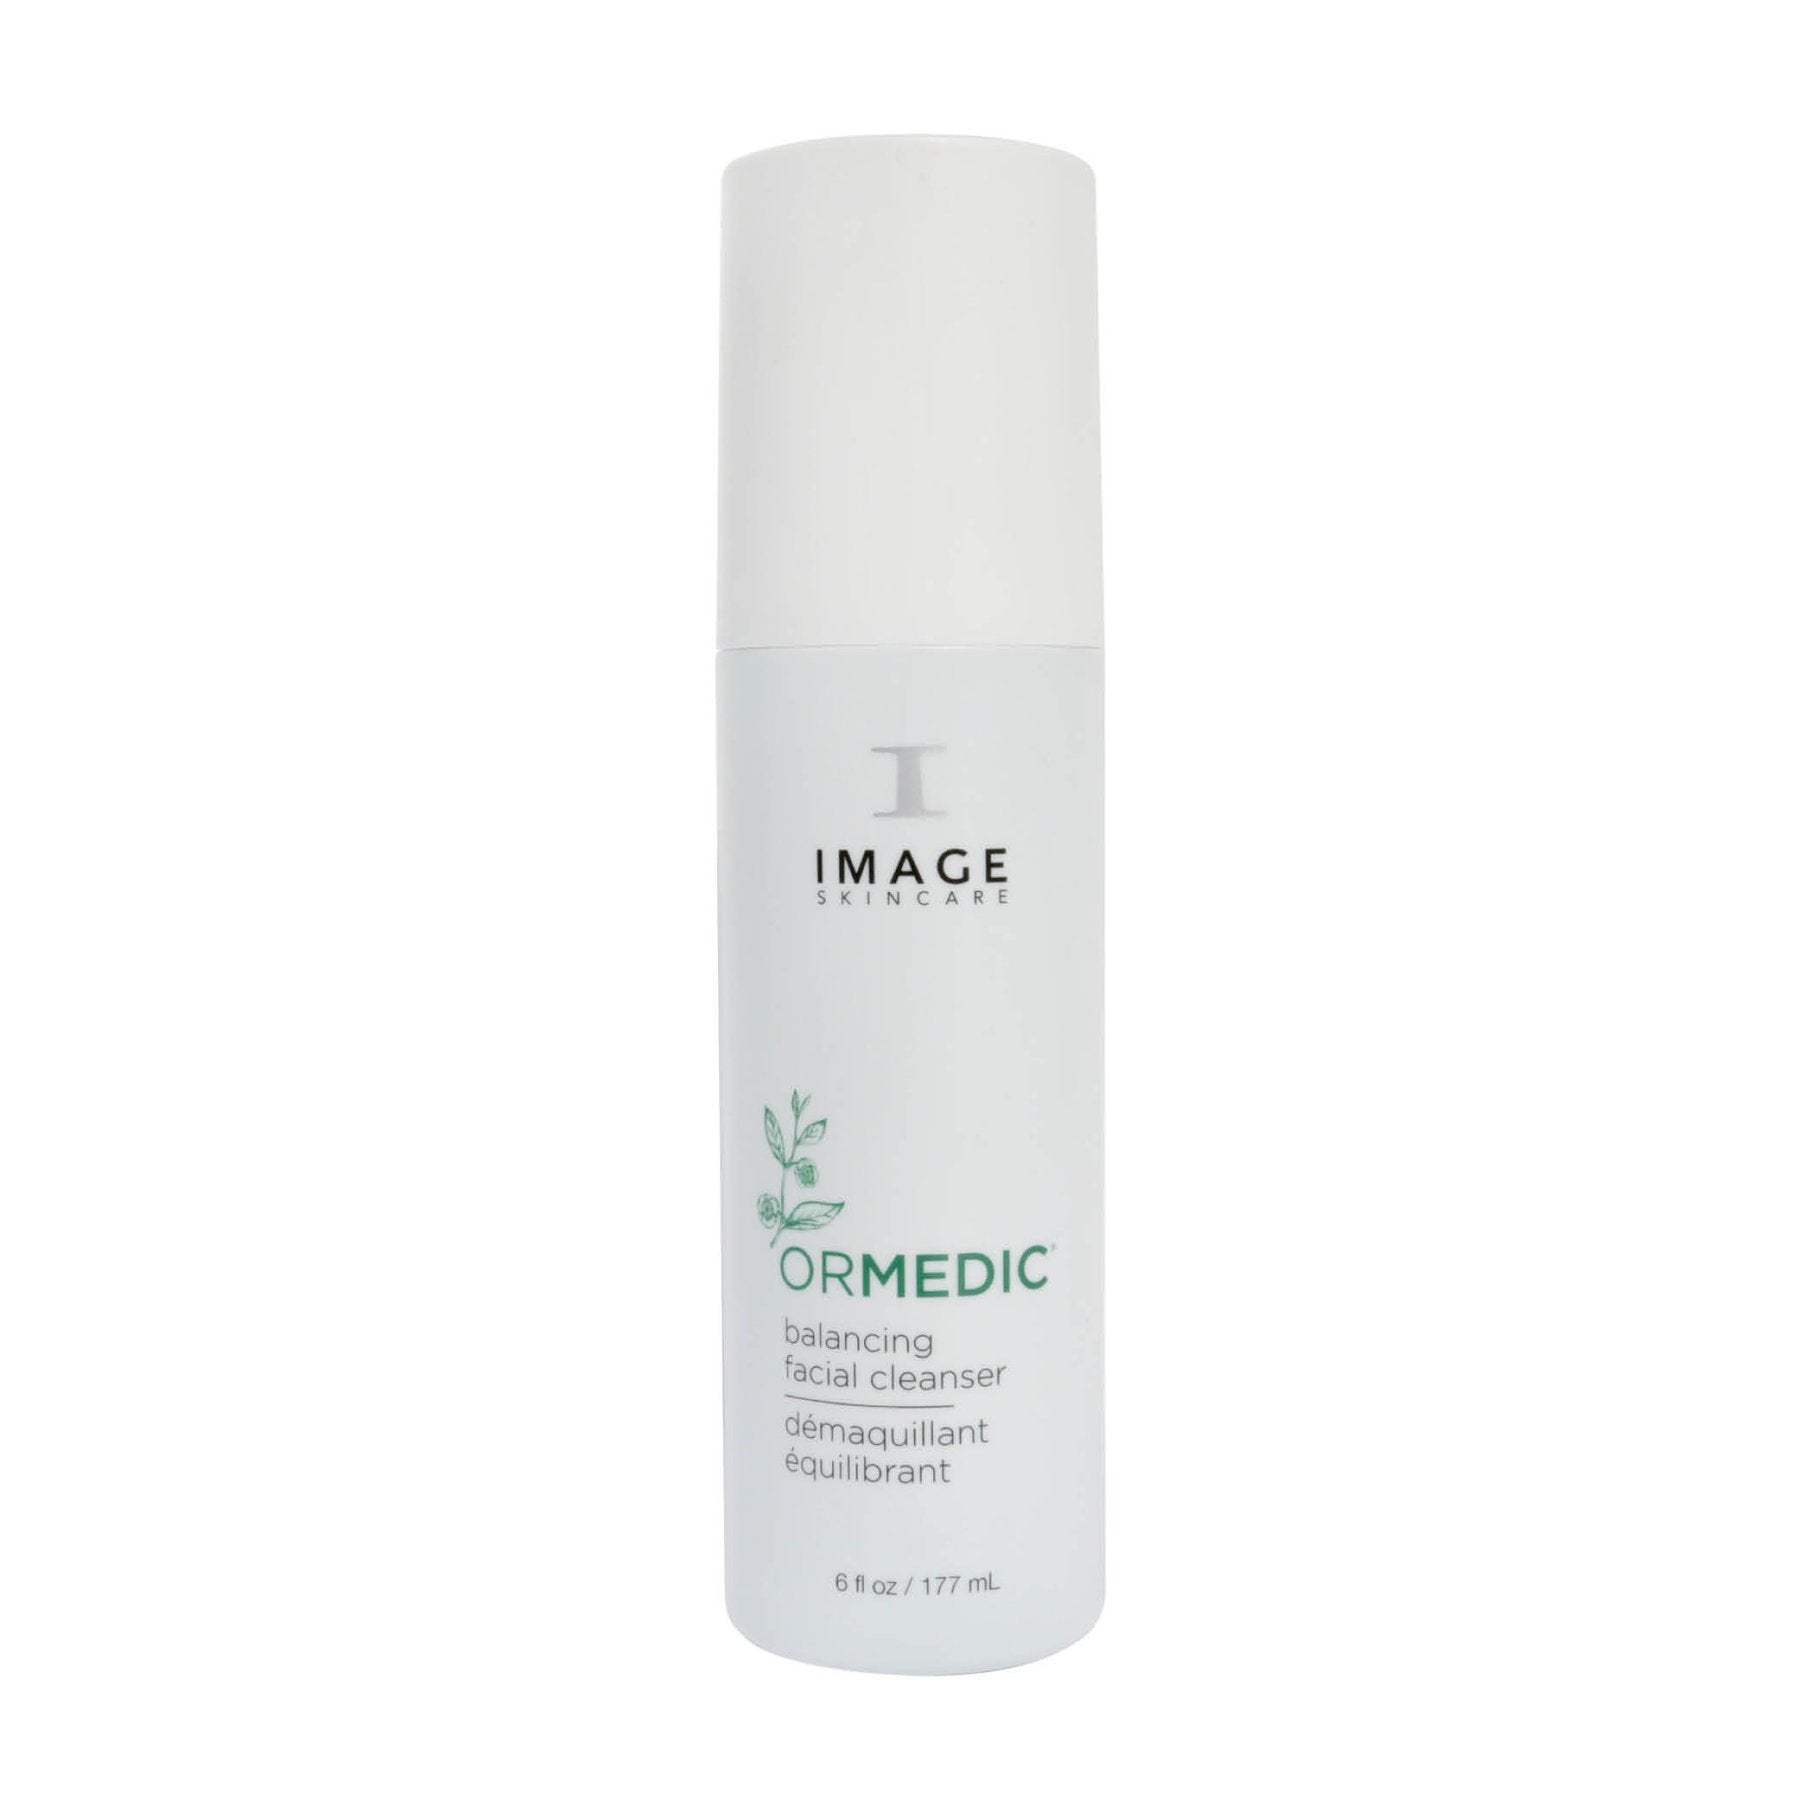 IMAGE - Ormedic Balancing Facial Cleanser All Skin Types